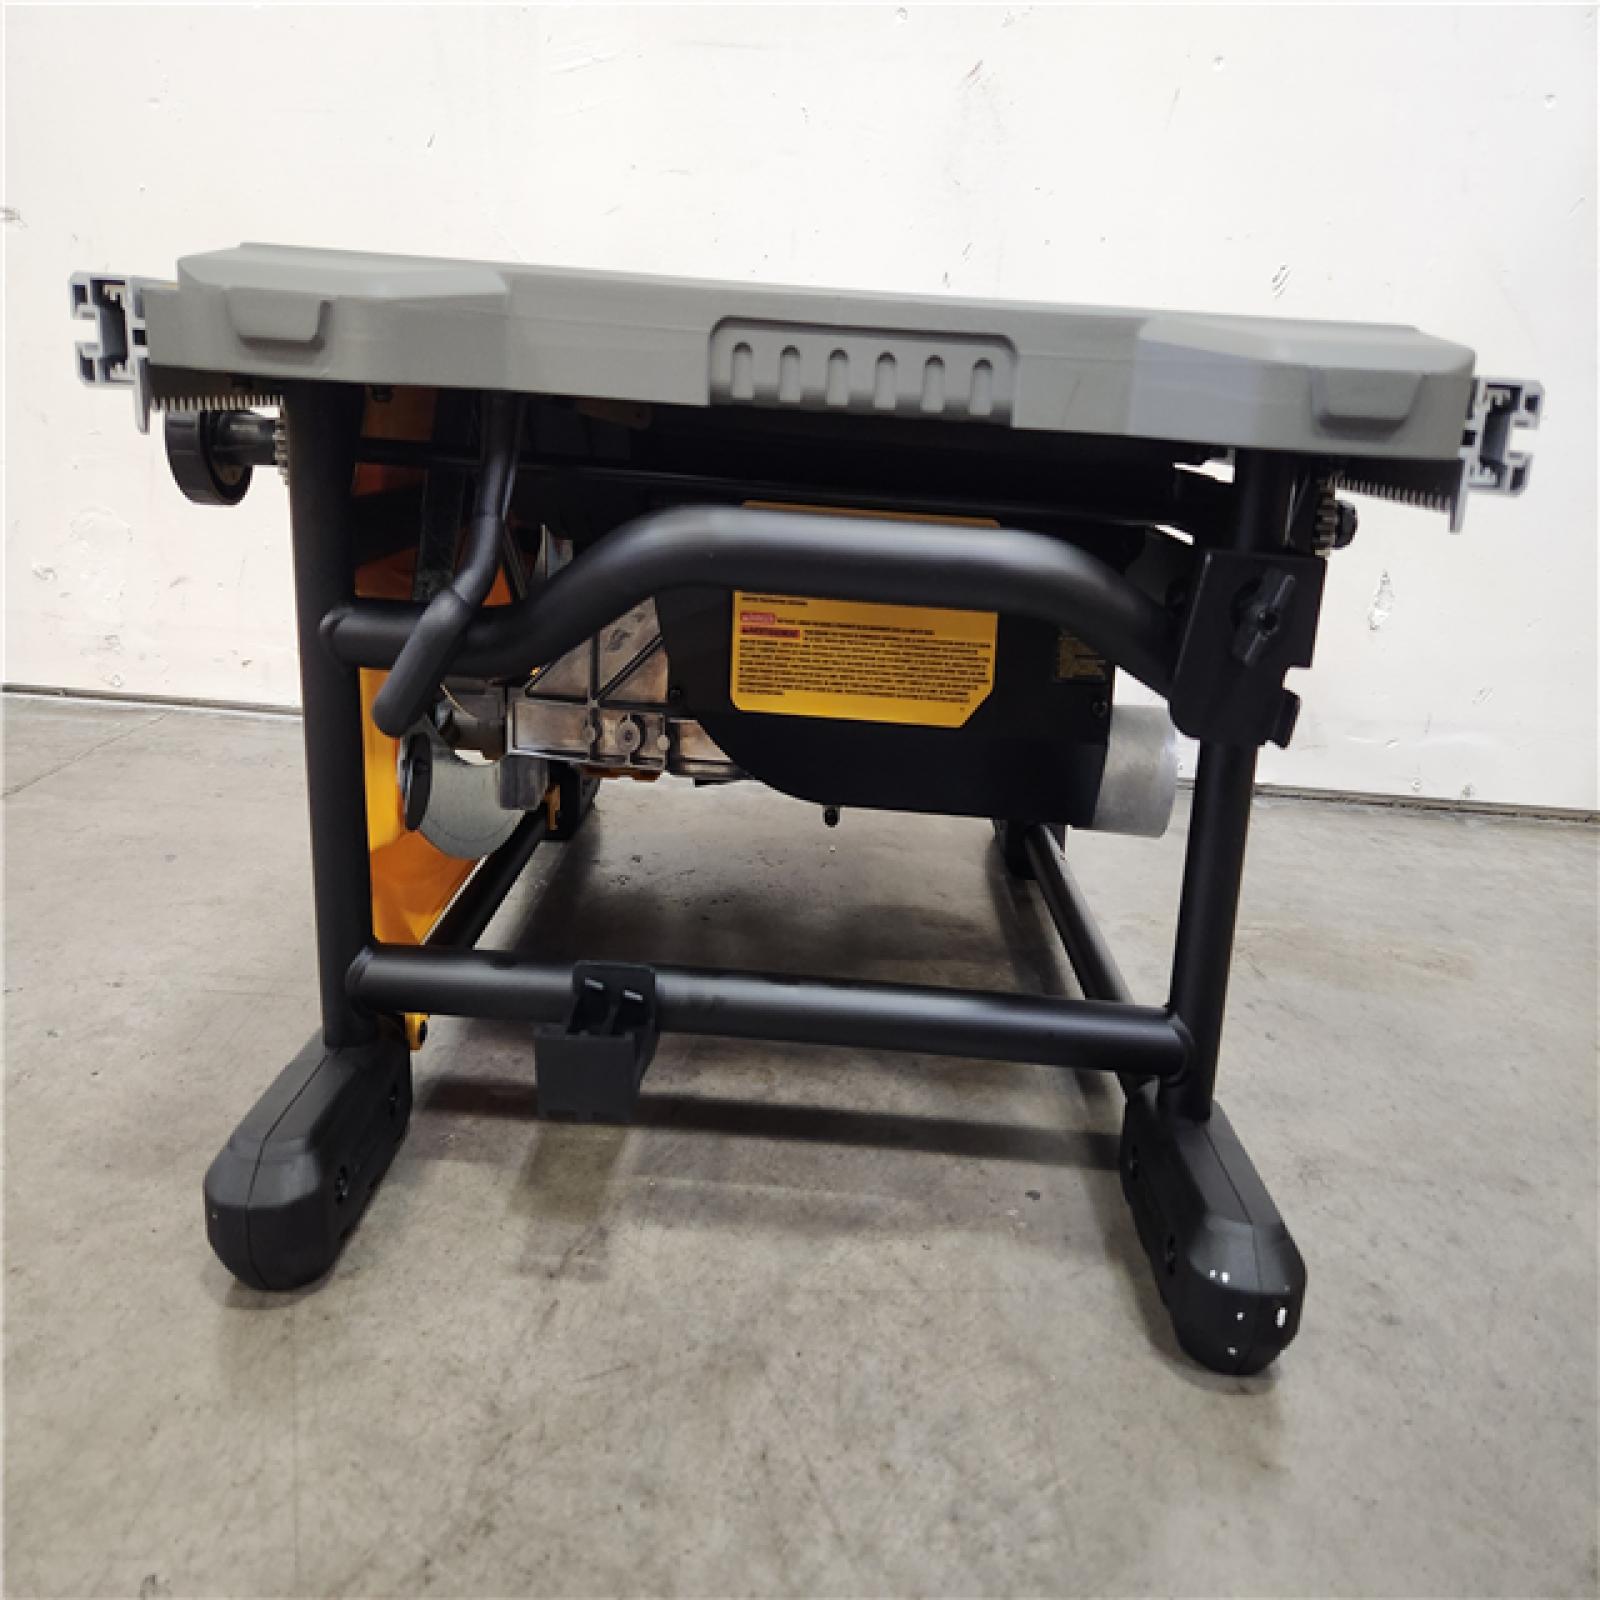 Phoenix Location NEW DEWALT 15 Amp Corded 10 in. Job Site Table Saw with Rolling Stand